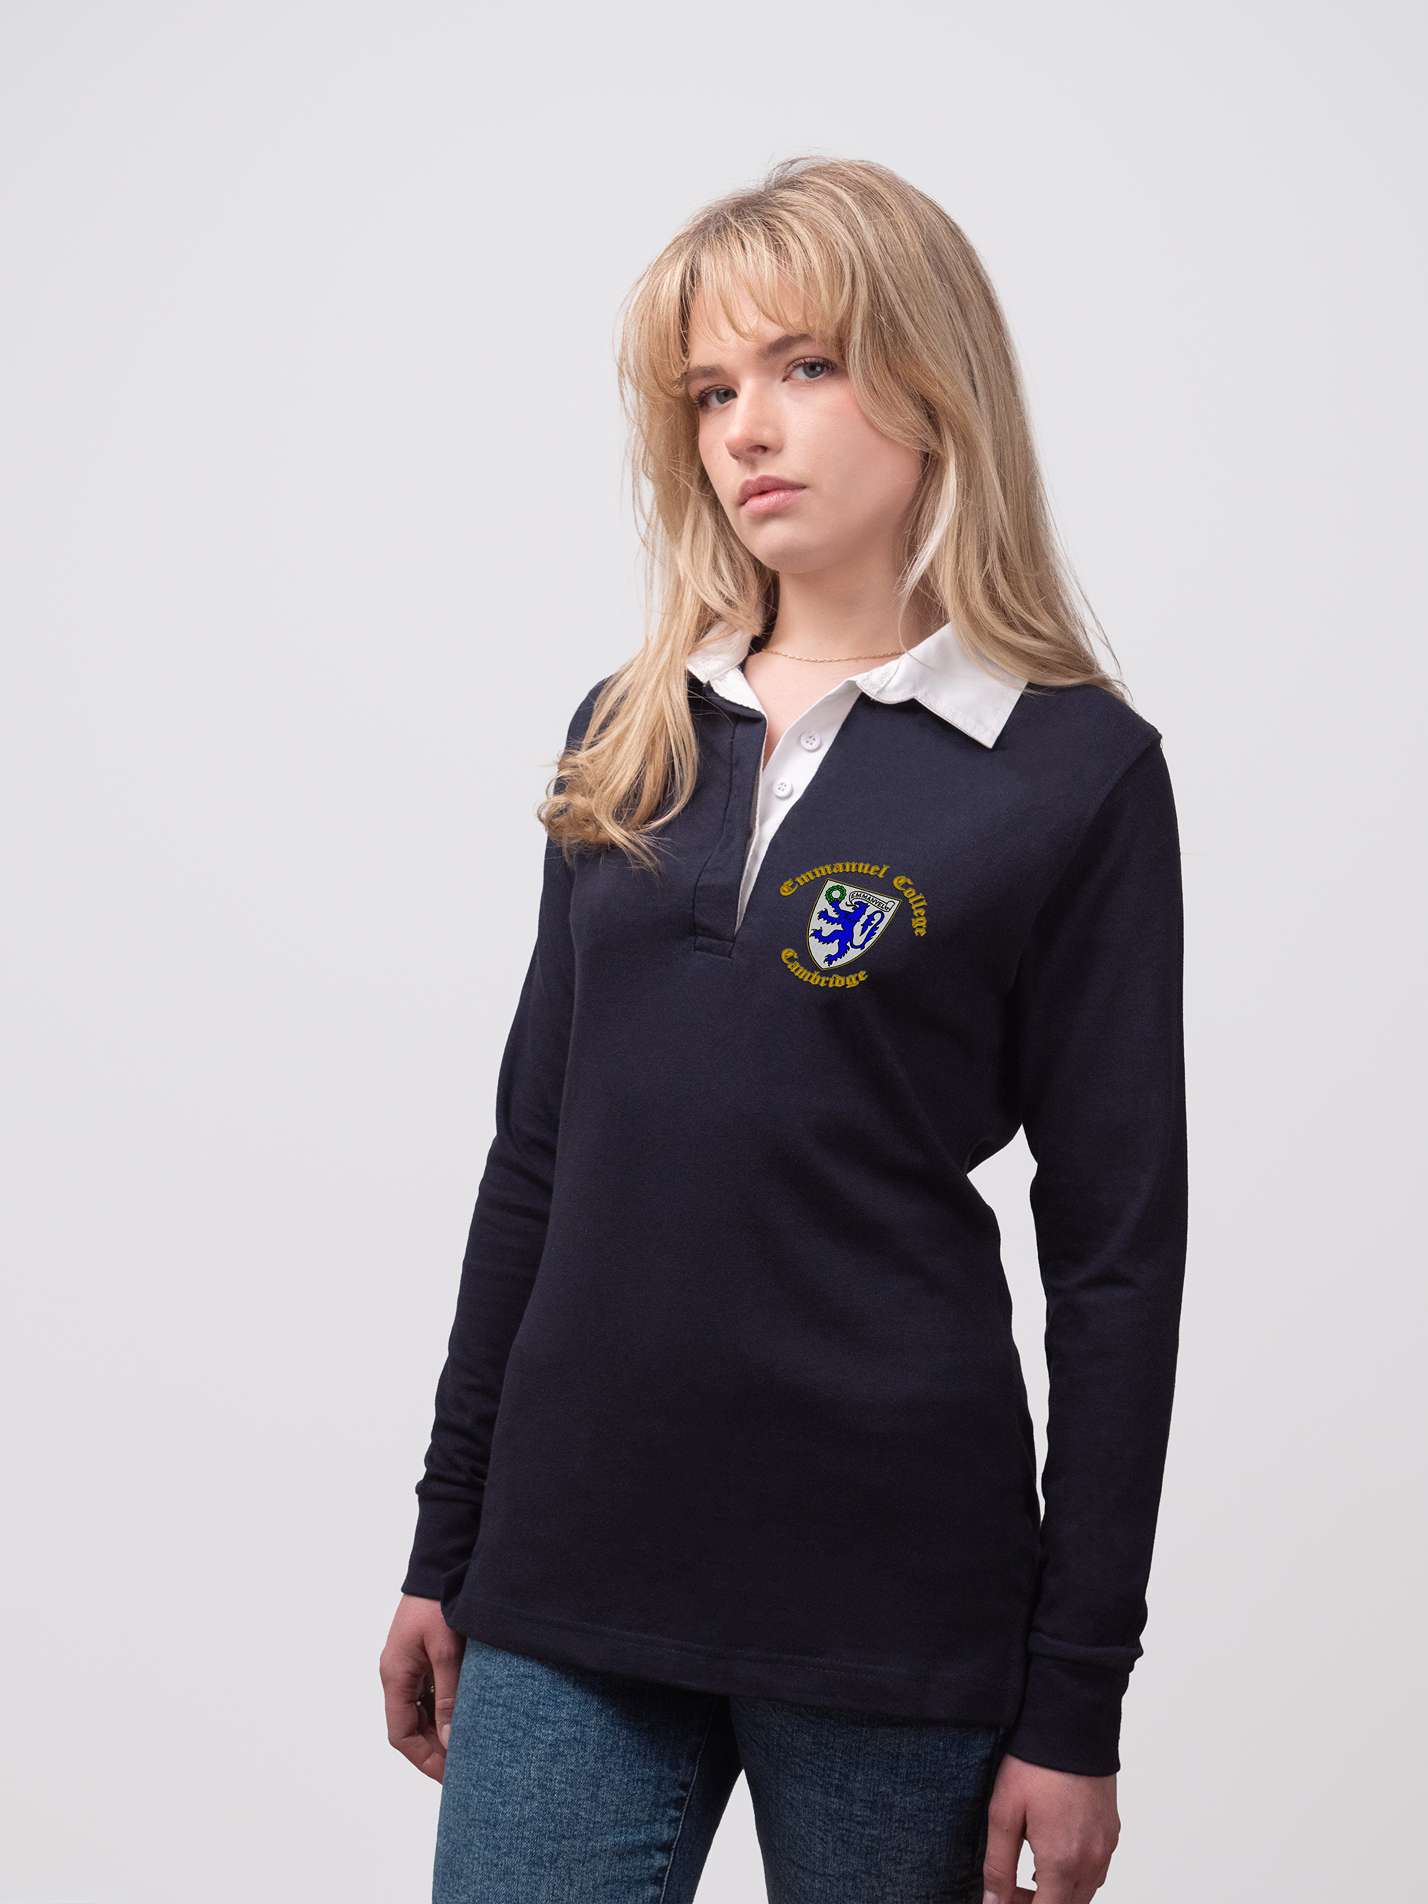 Student wearing a navy Emmanuel College rugby shirt with embroidered crest